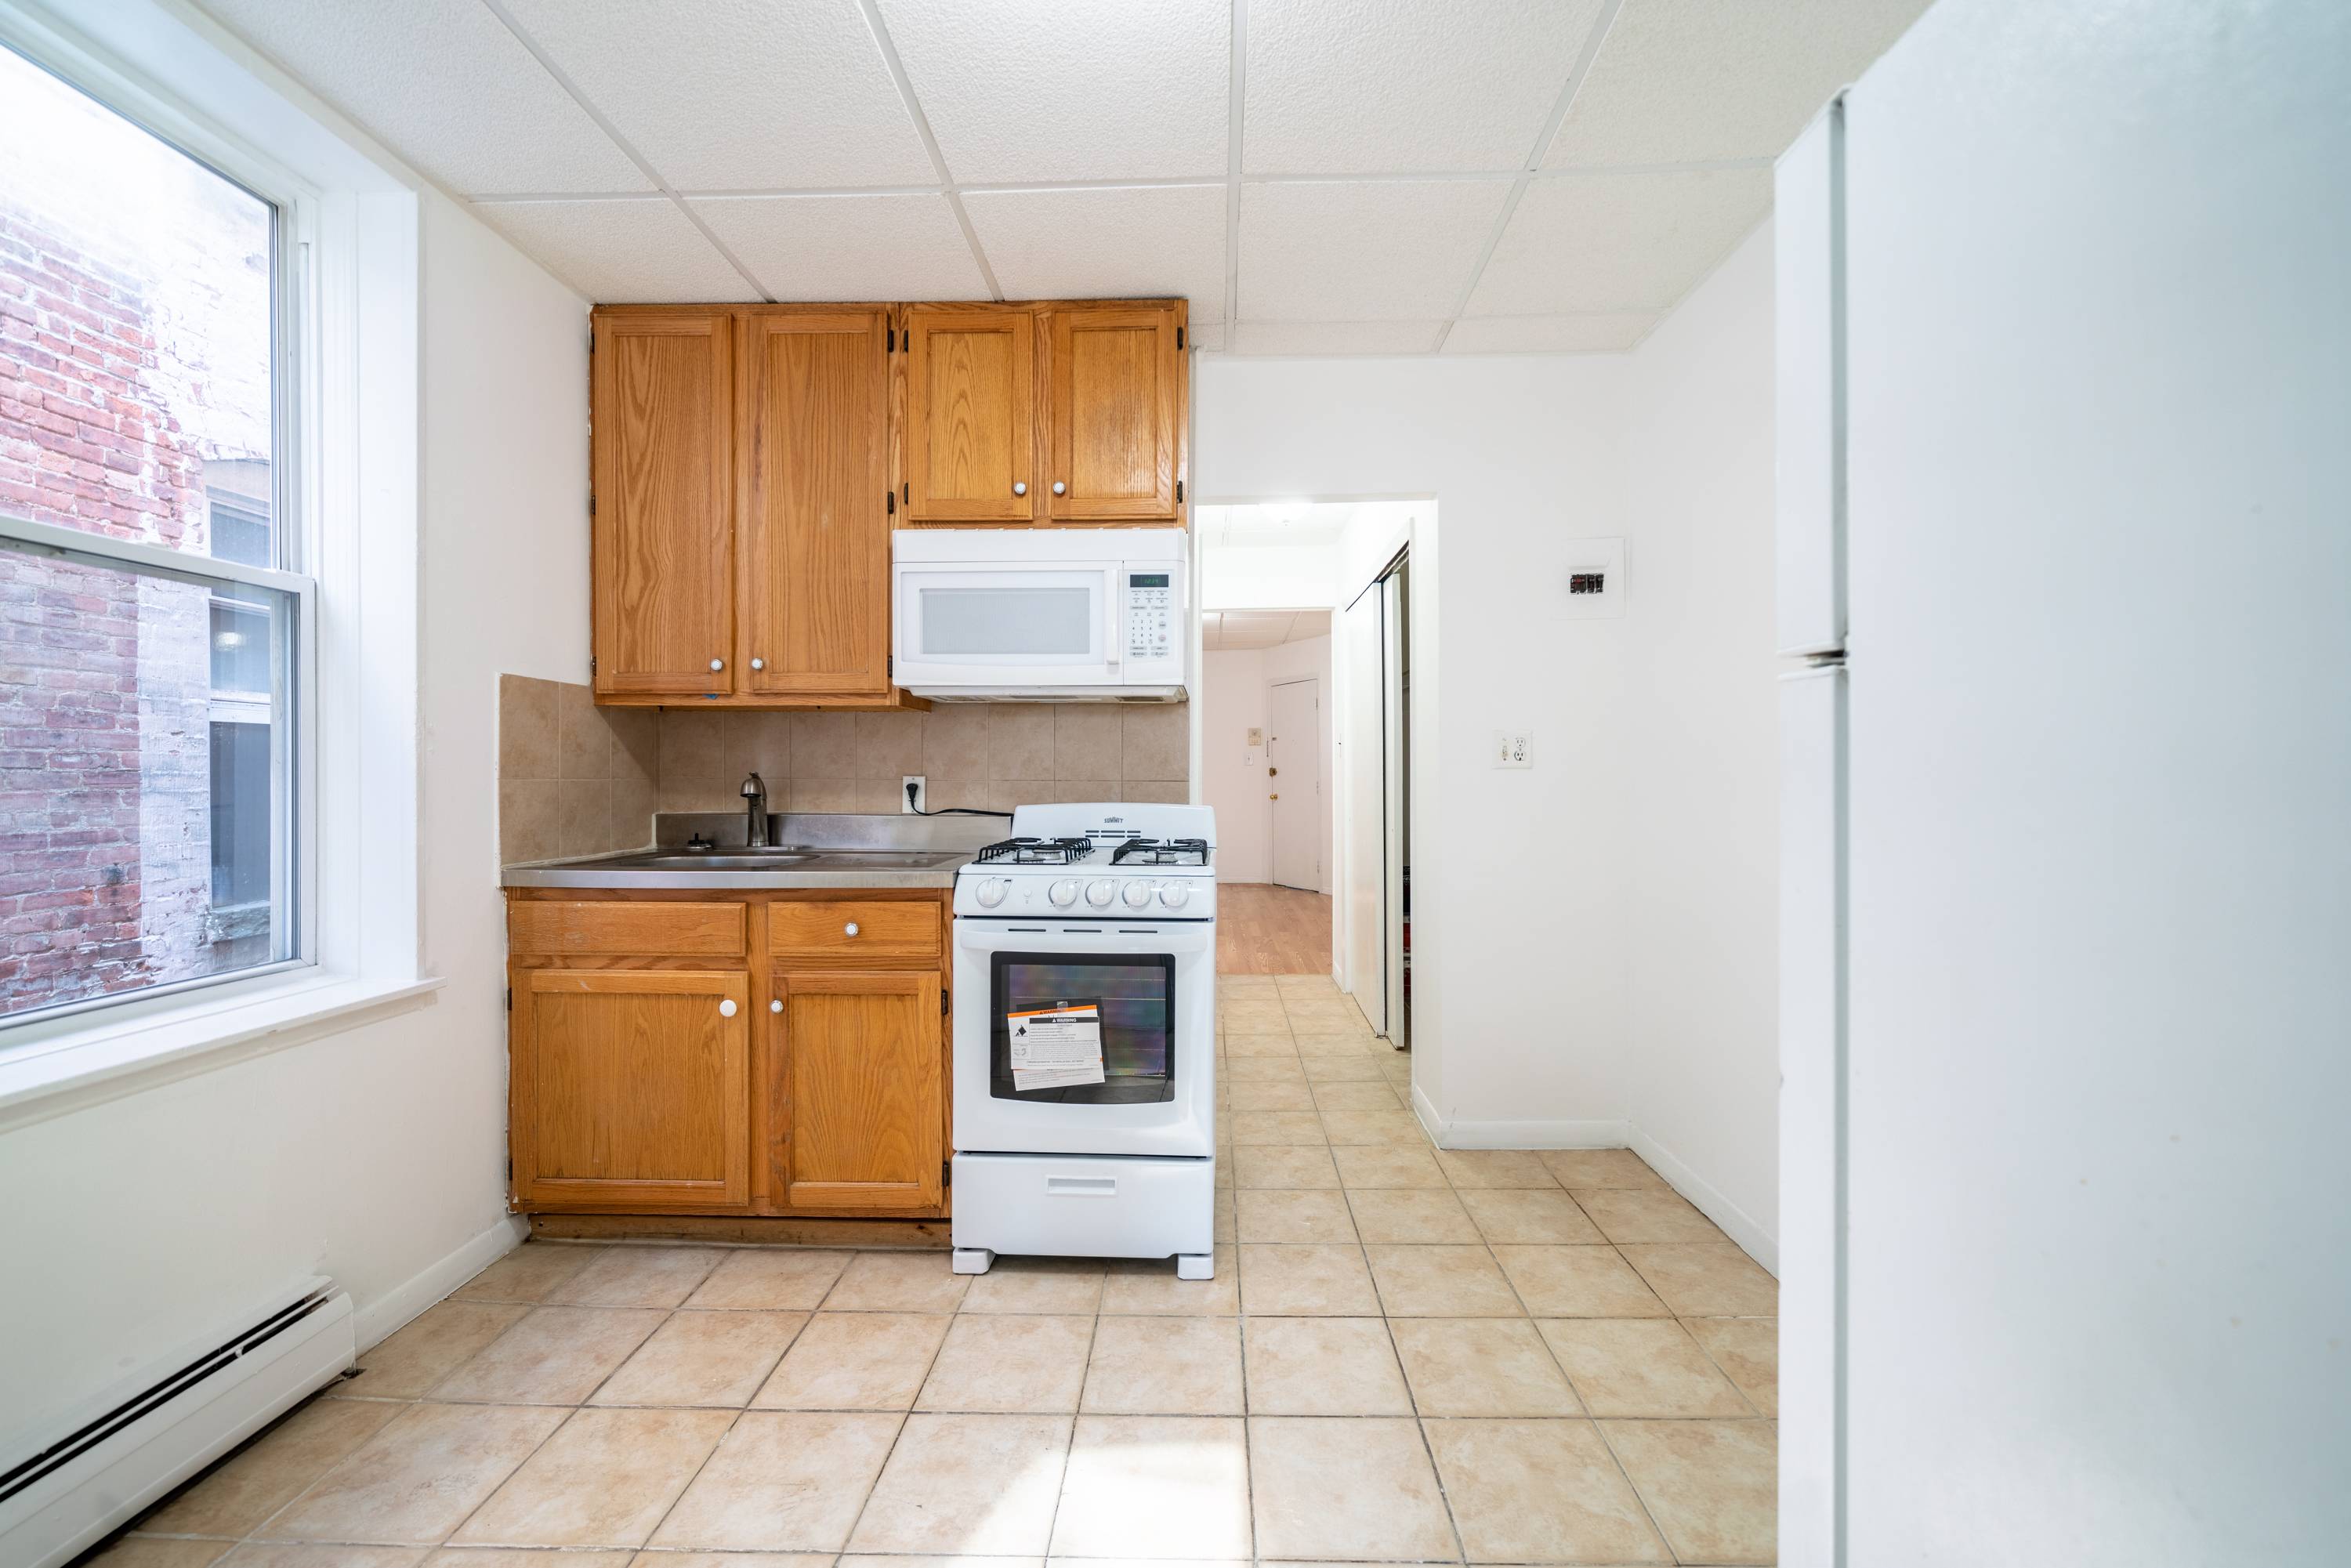 1  BR- Stunning Renovated One Bedroom in Prime Journal Square Location!  Laundry on Site, Seconds to the Journal Square Path Transportation Center!